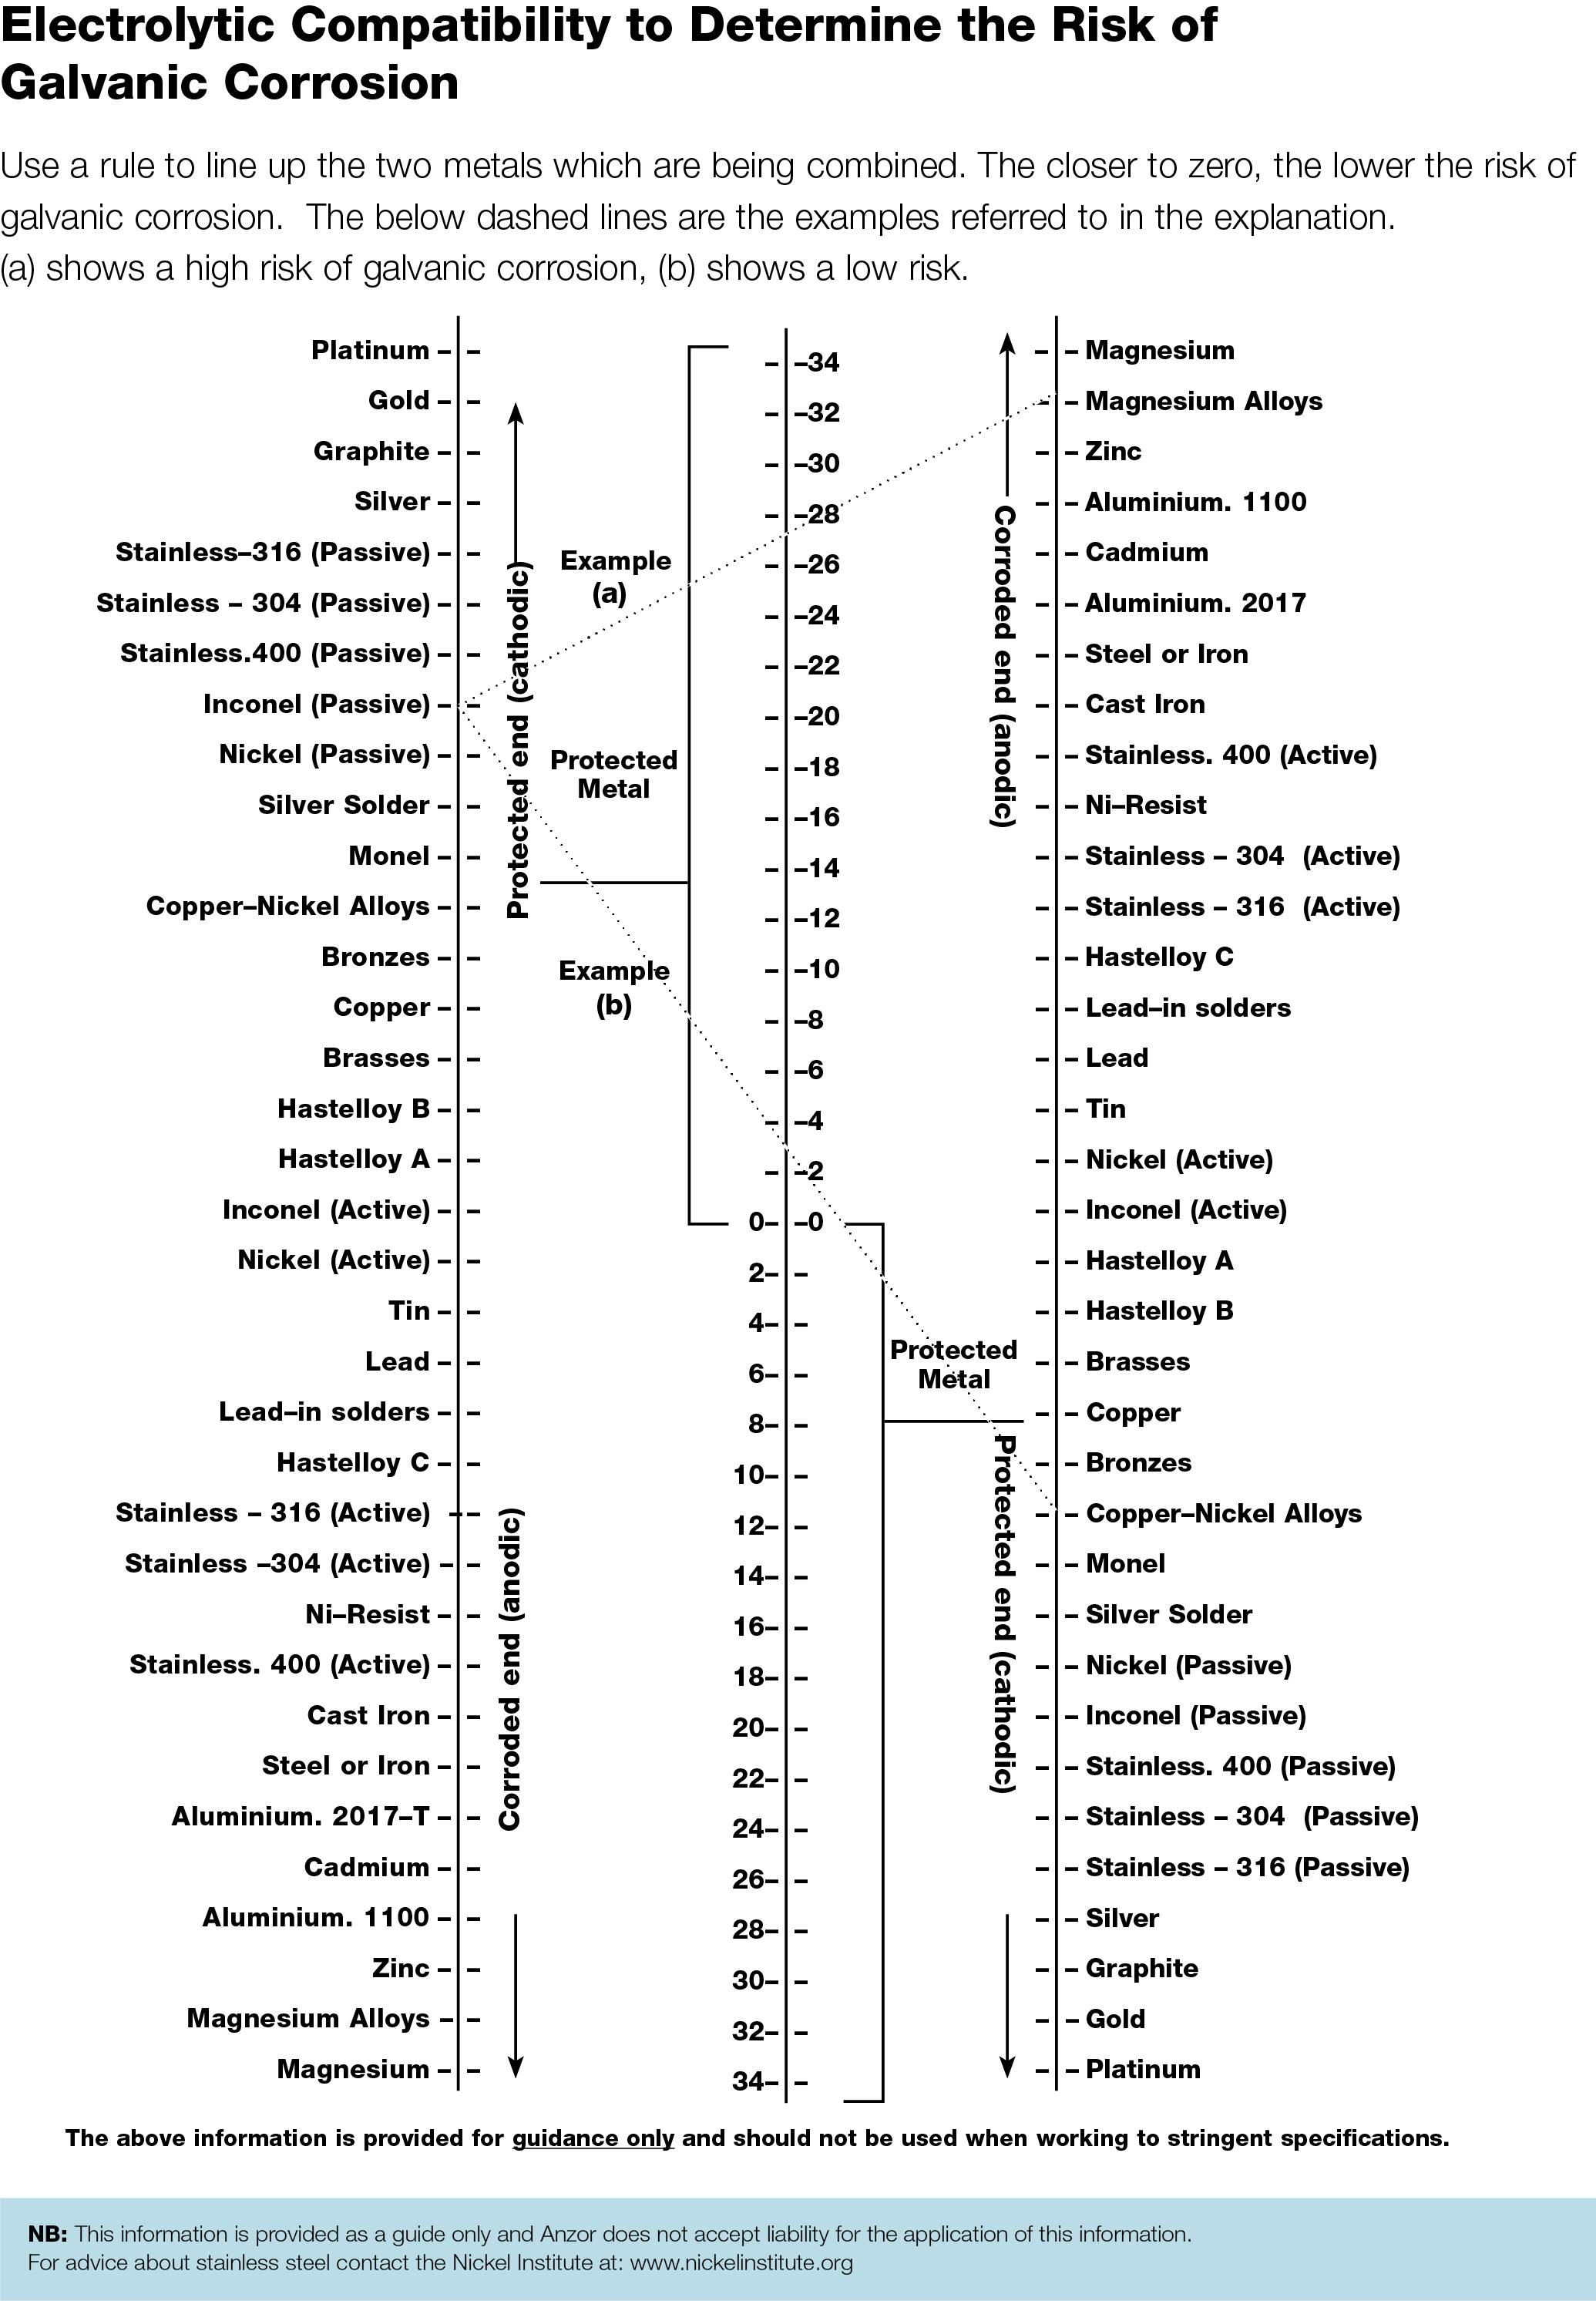 Galvanic Electrylitic Compatability Chart